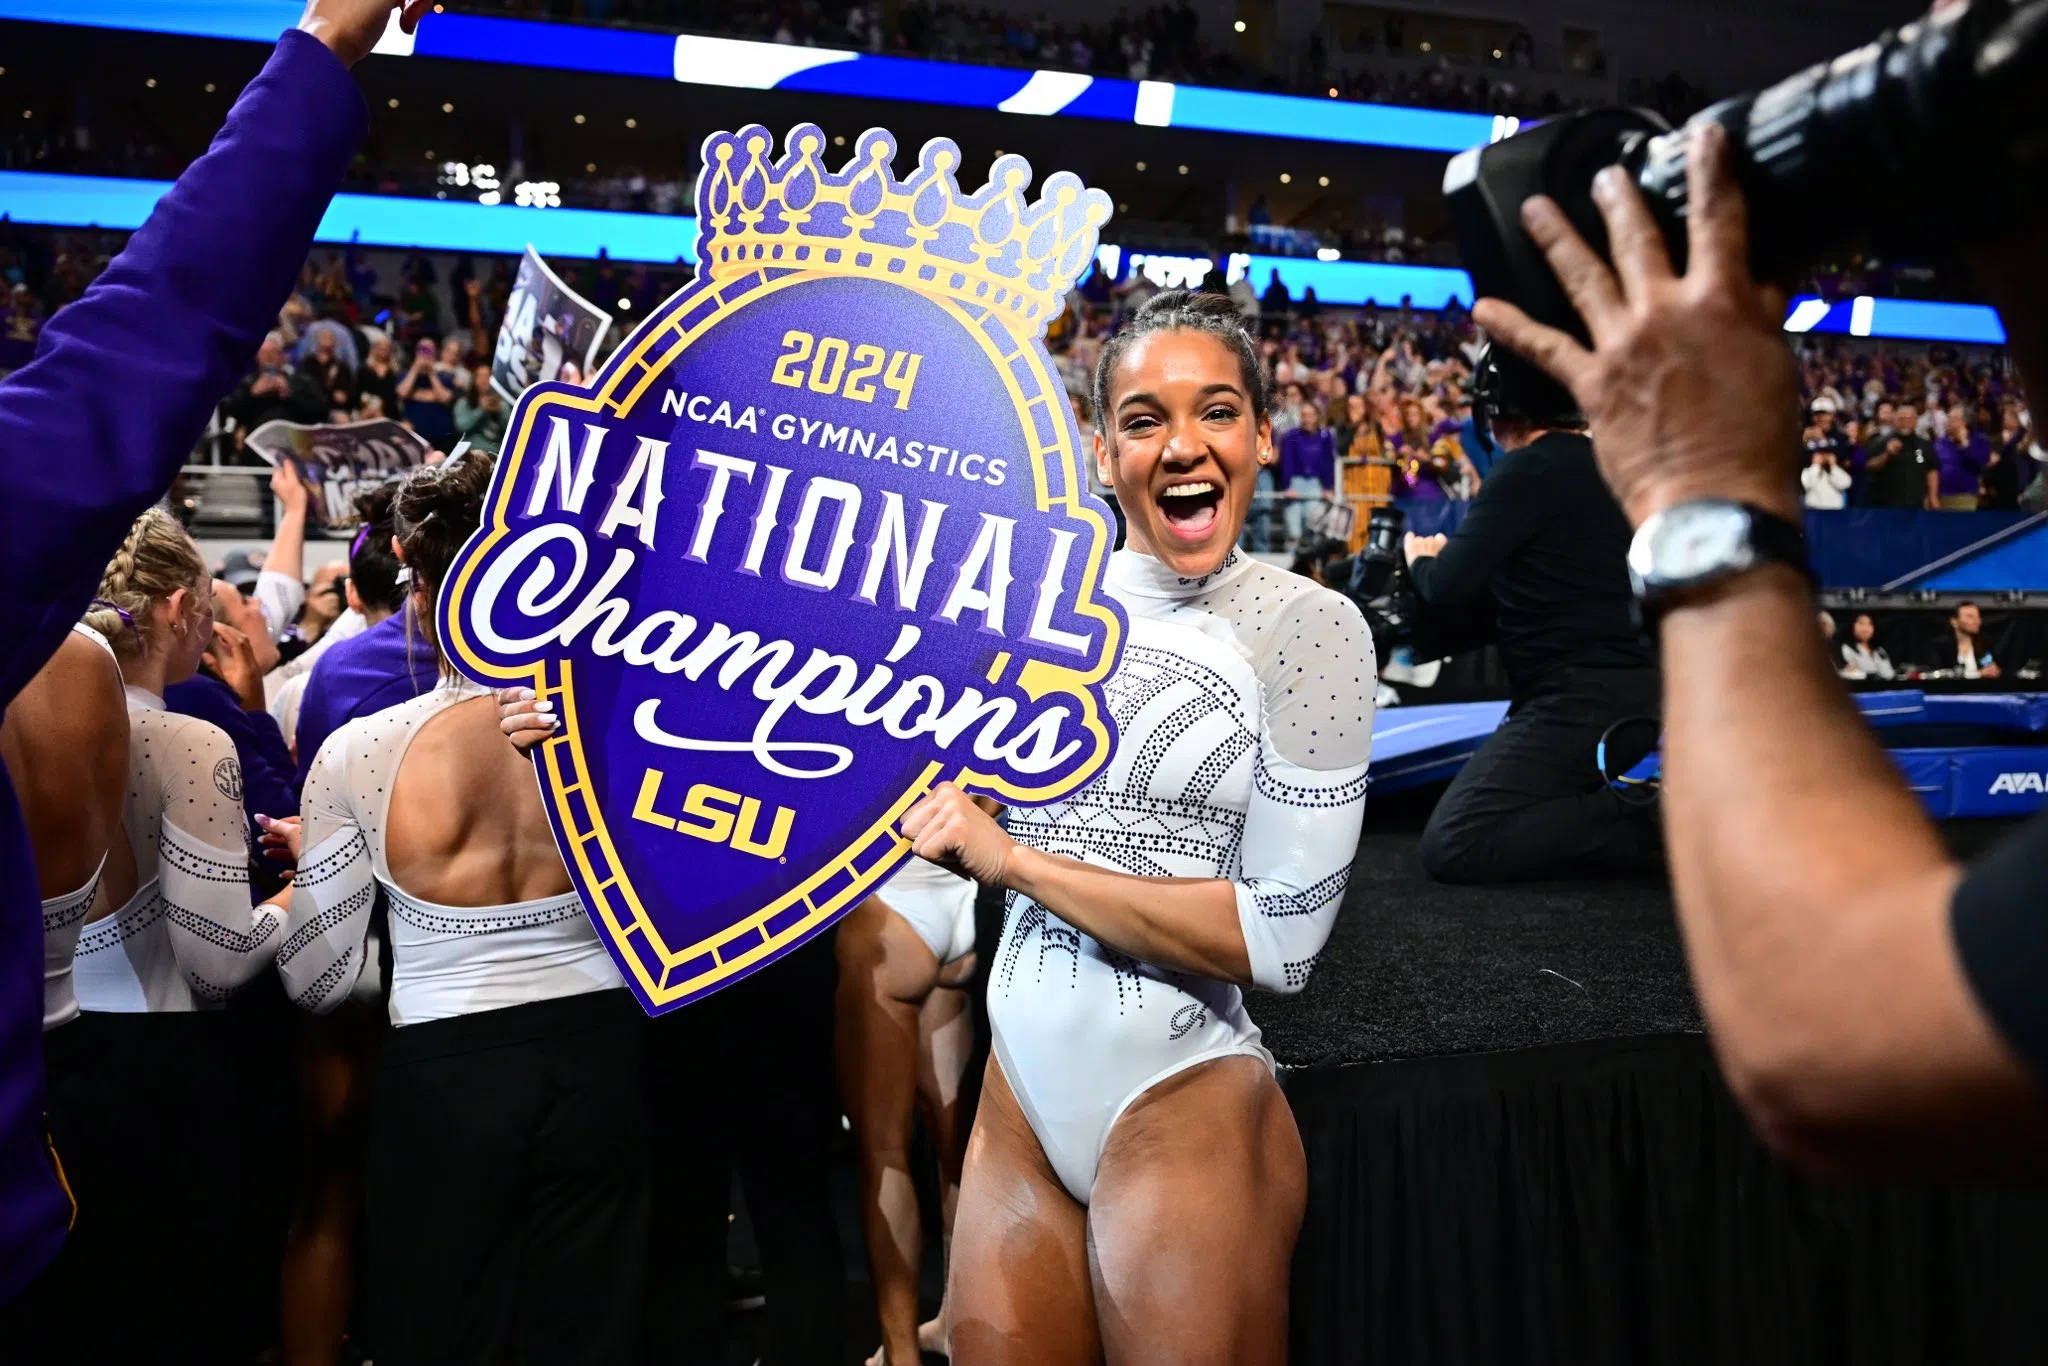 LSU gymnastics national champs for the first 1st time